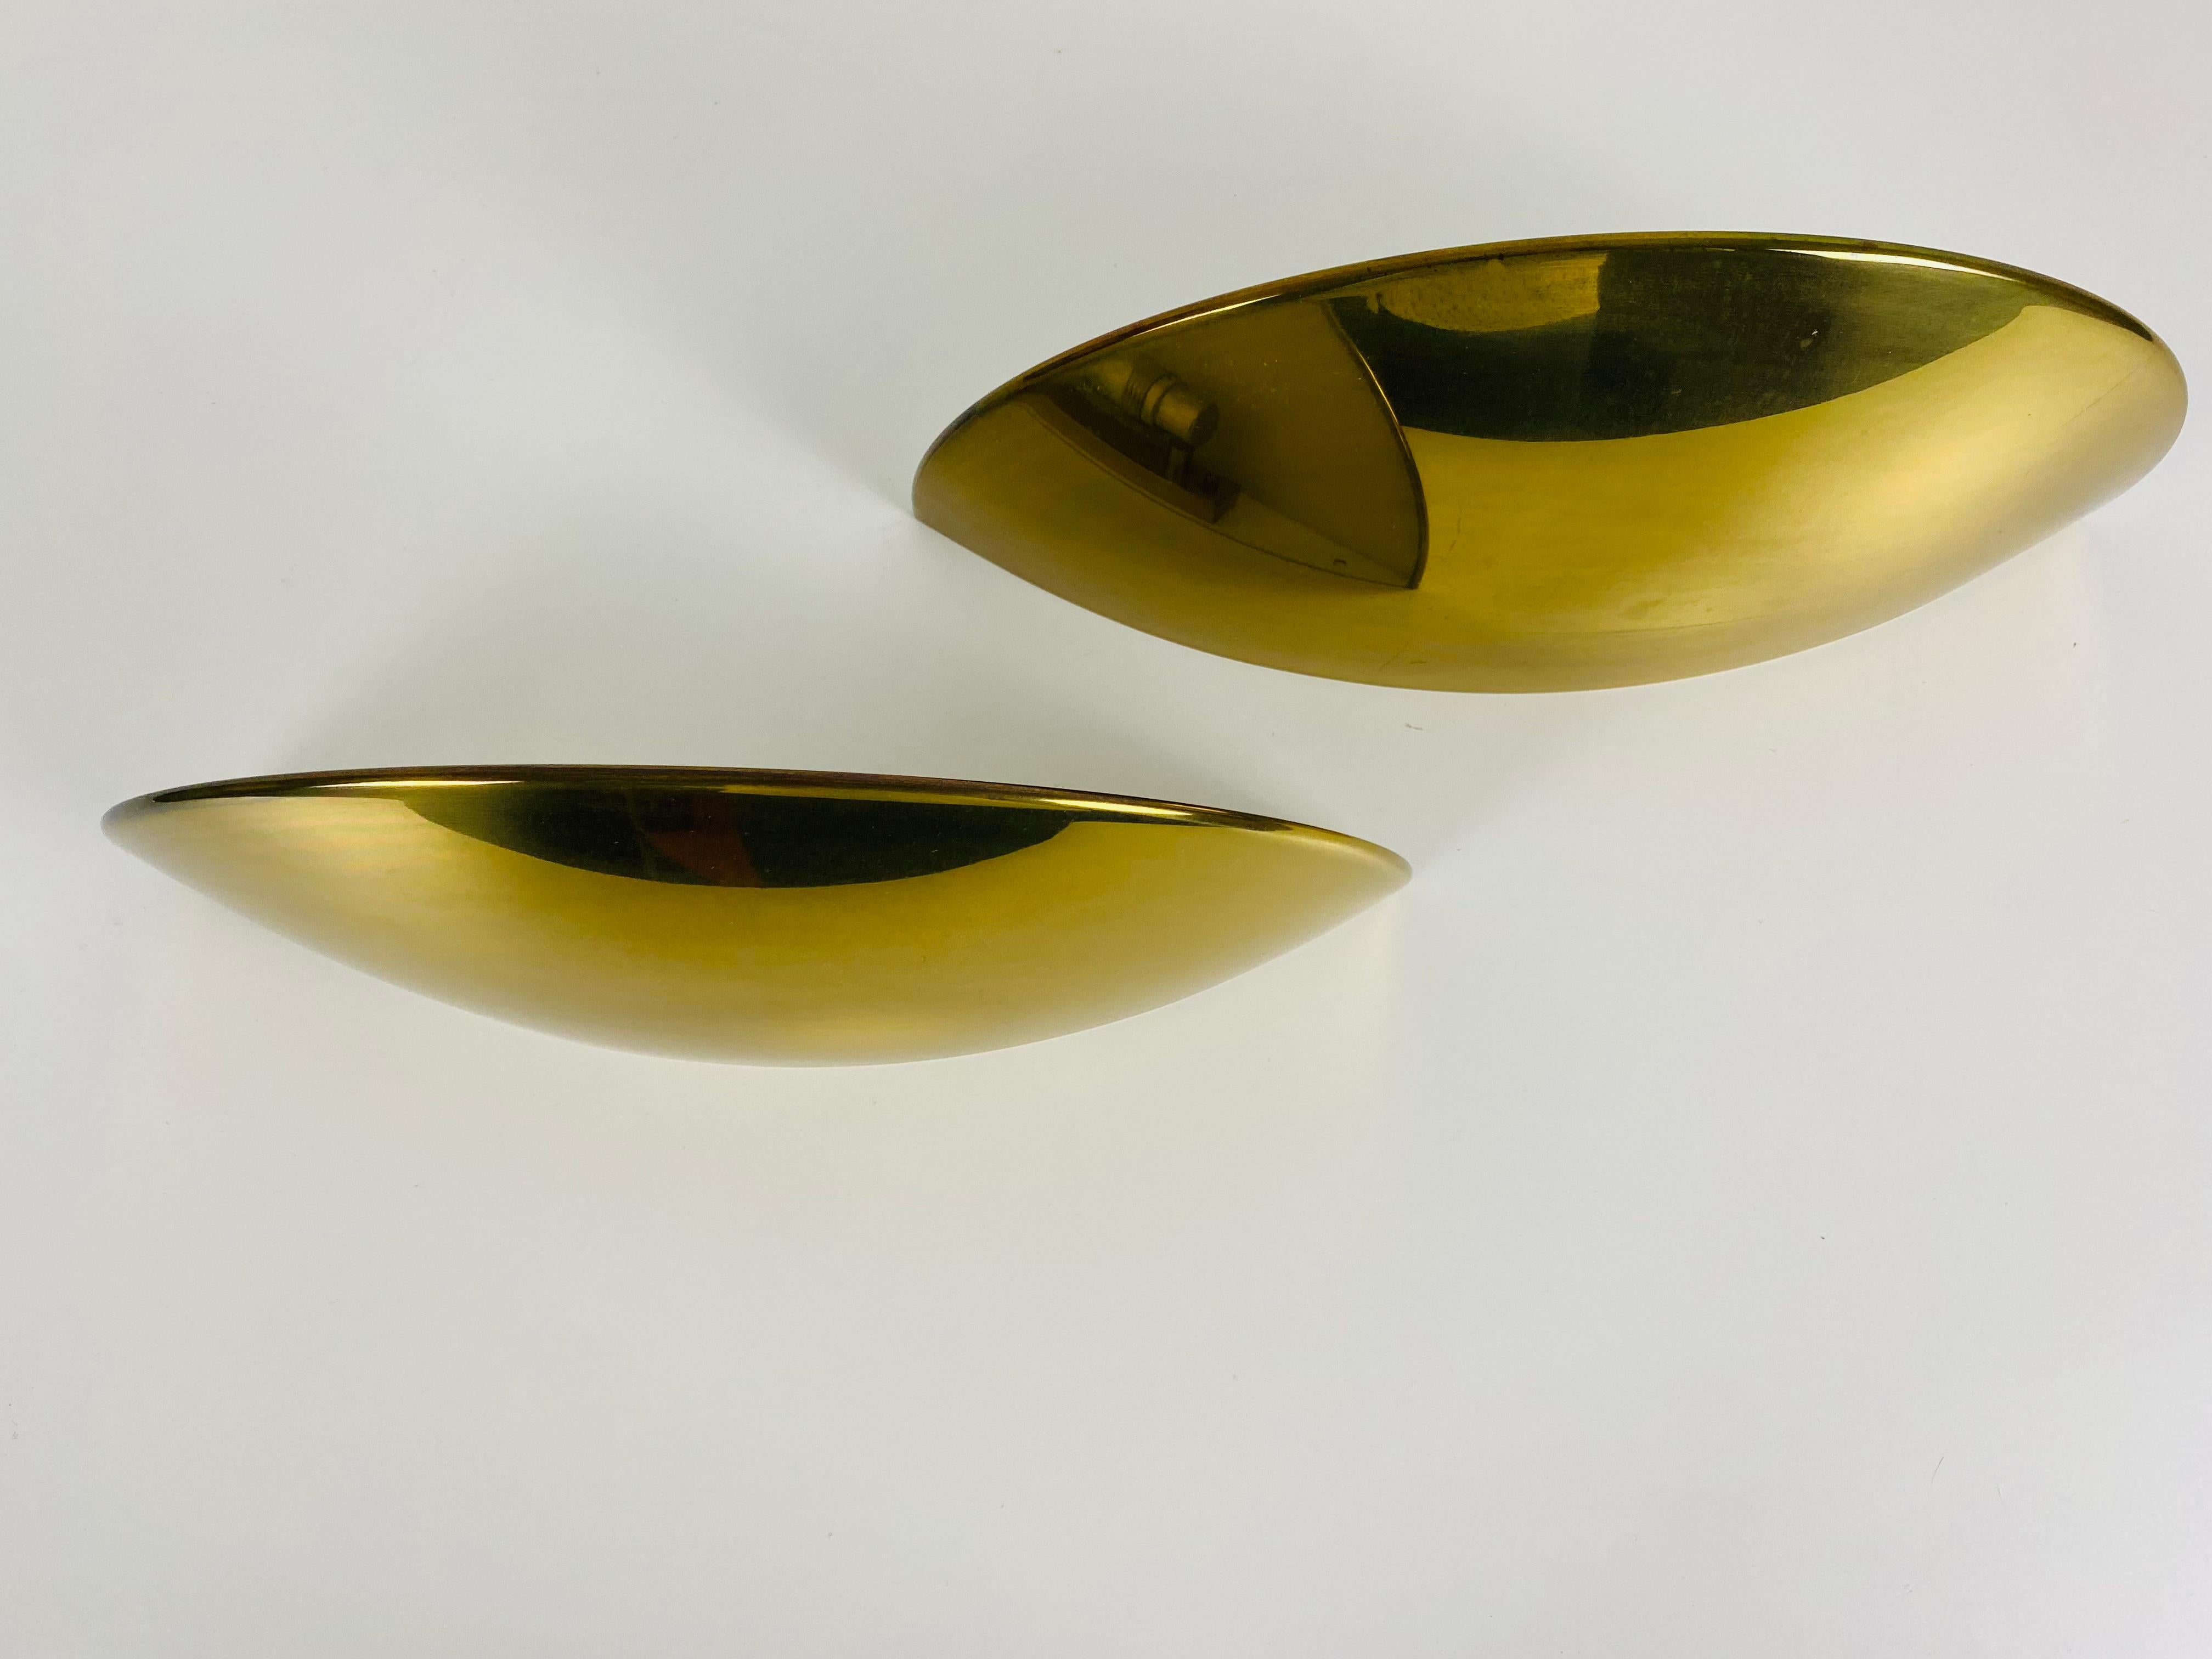 Pair of Florian Schulz Midcentury Brass Wall Lamps, 1960s For Sale 1